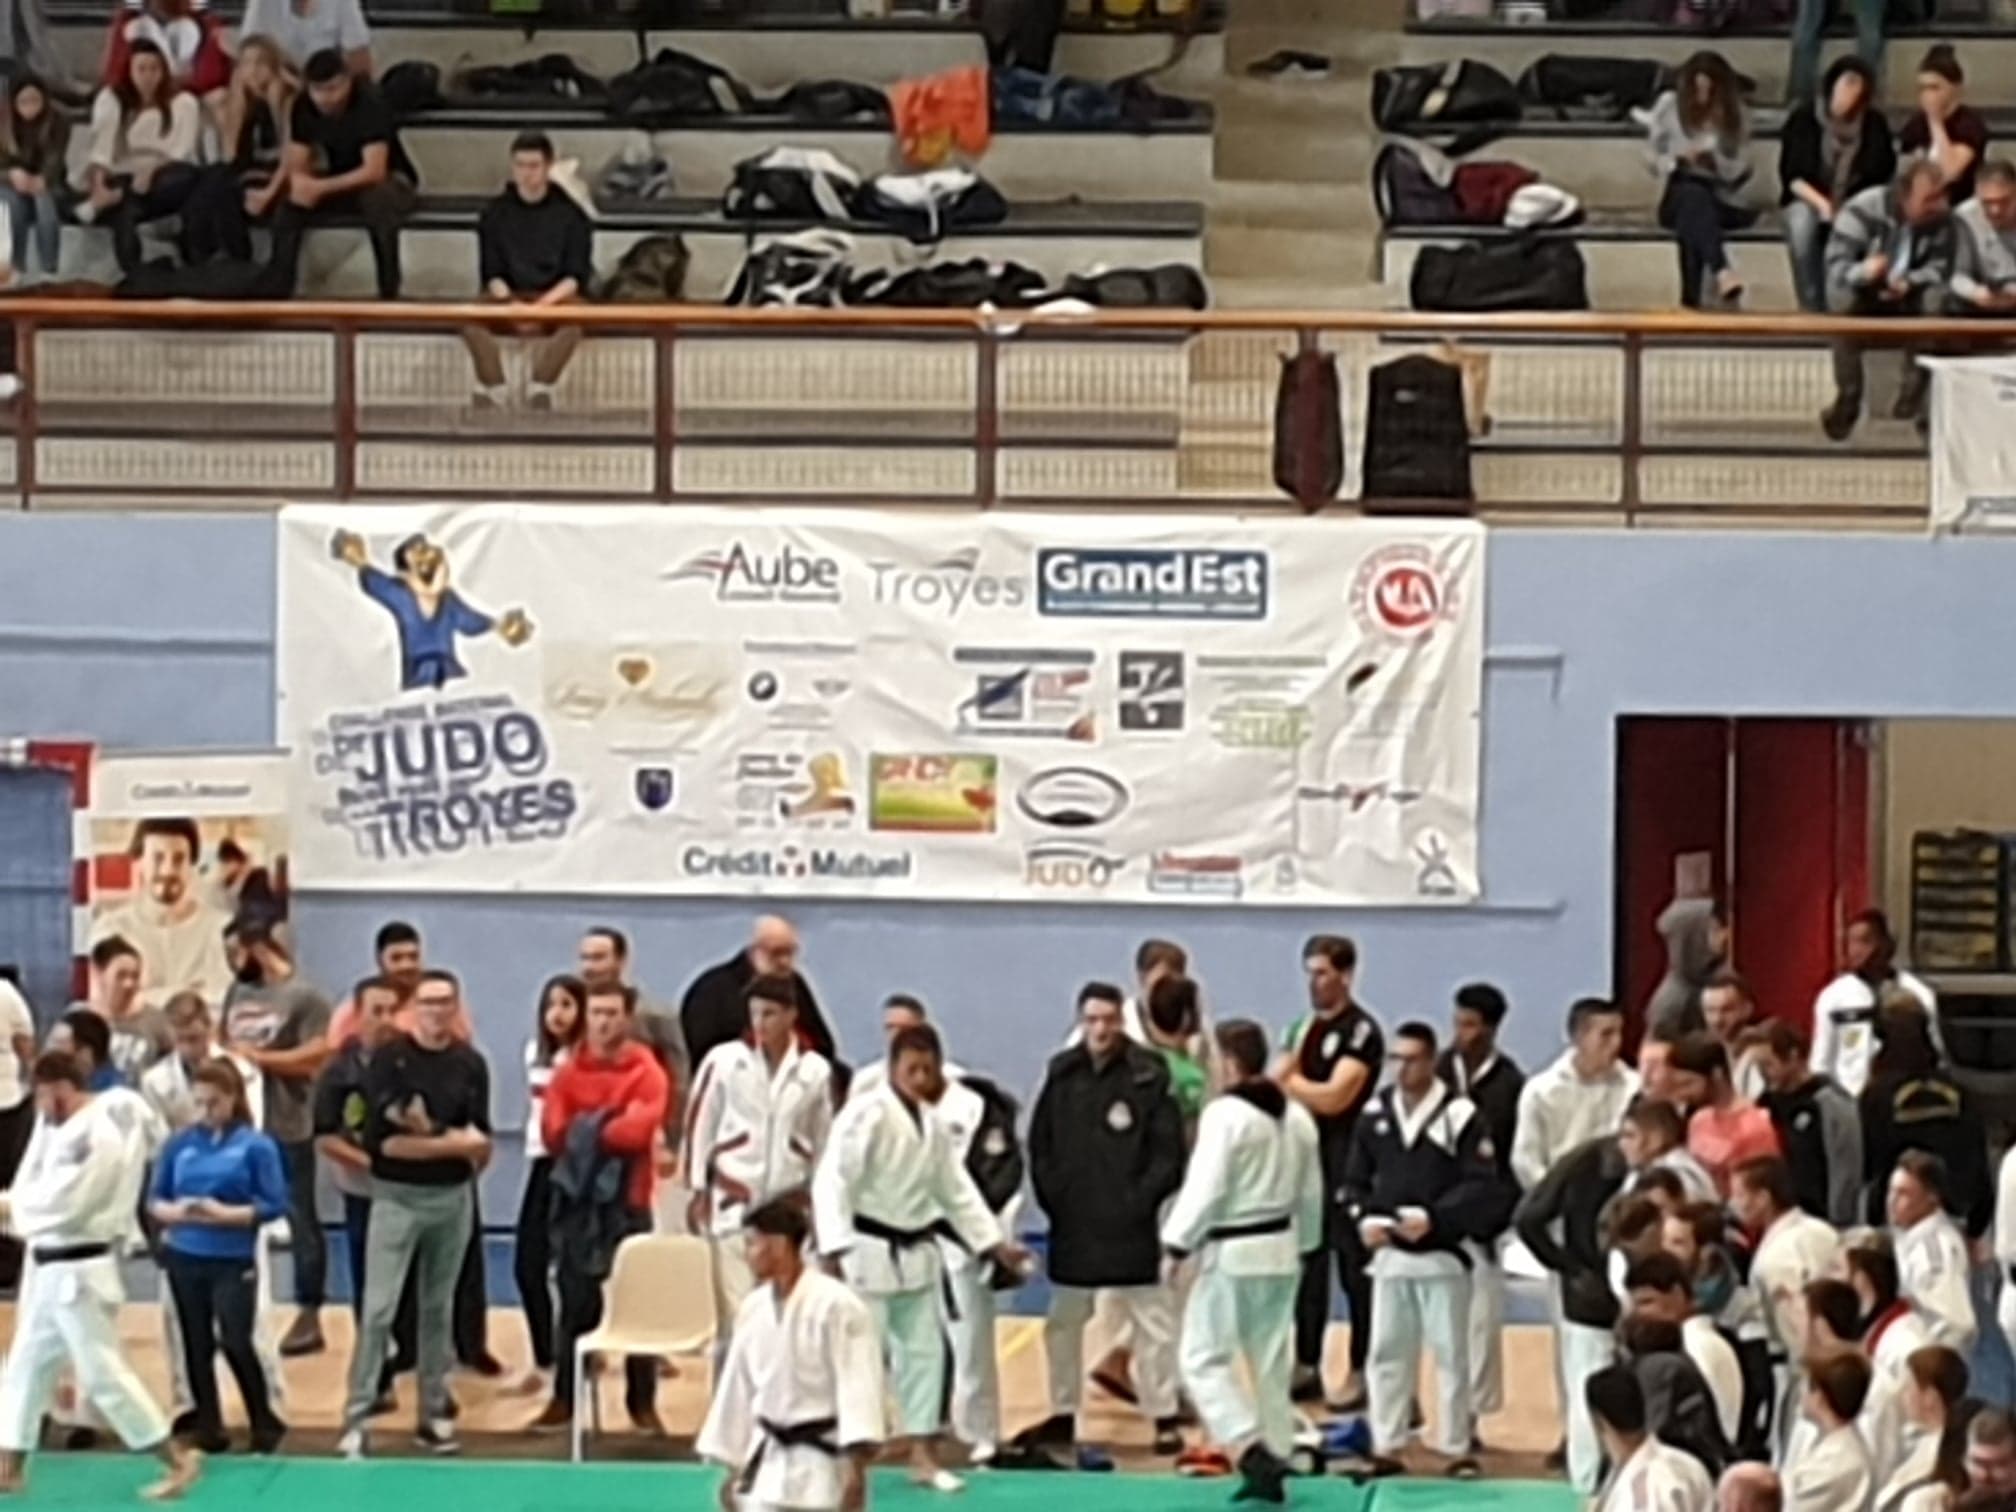 challenge-judo-troyes-champagne-leroy-meirhaeghe-montgueux